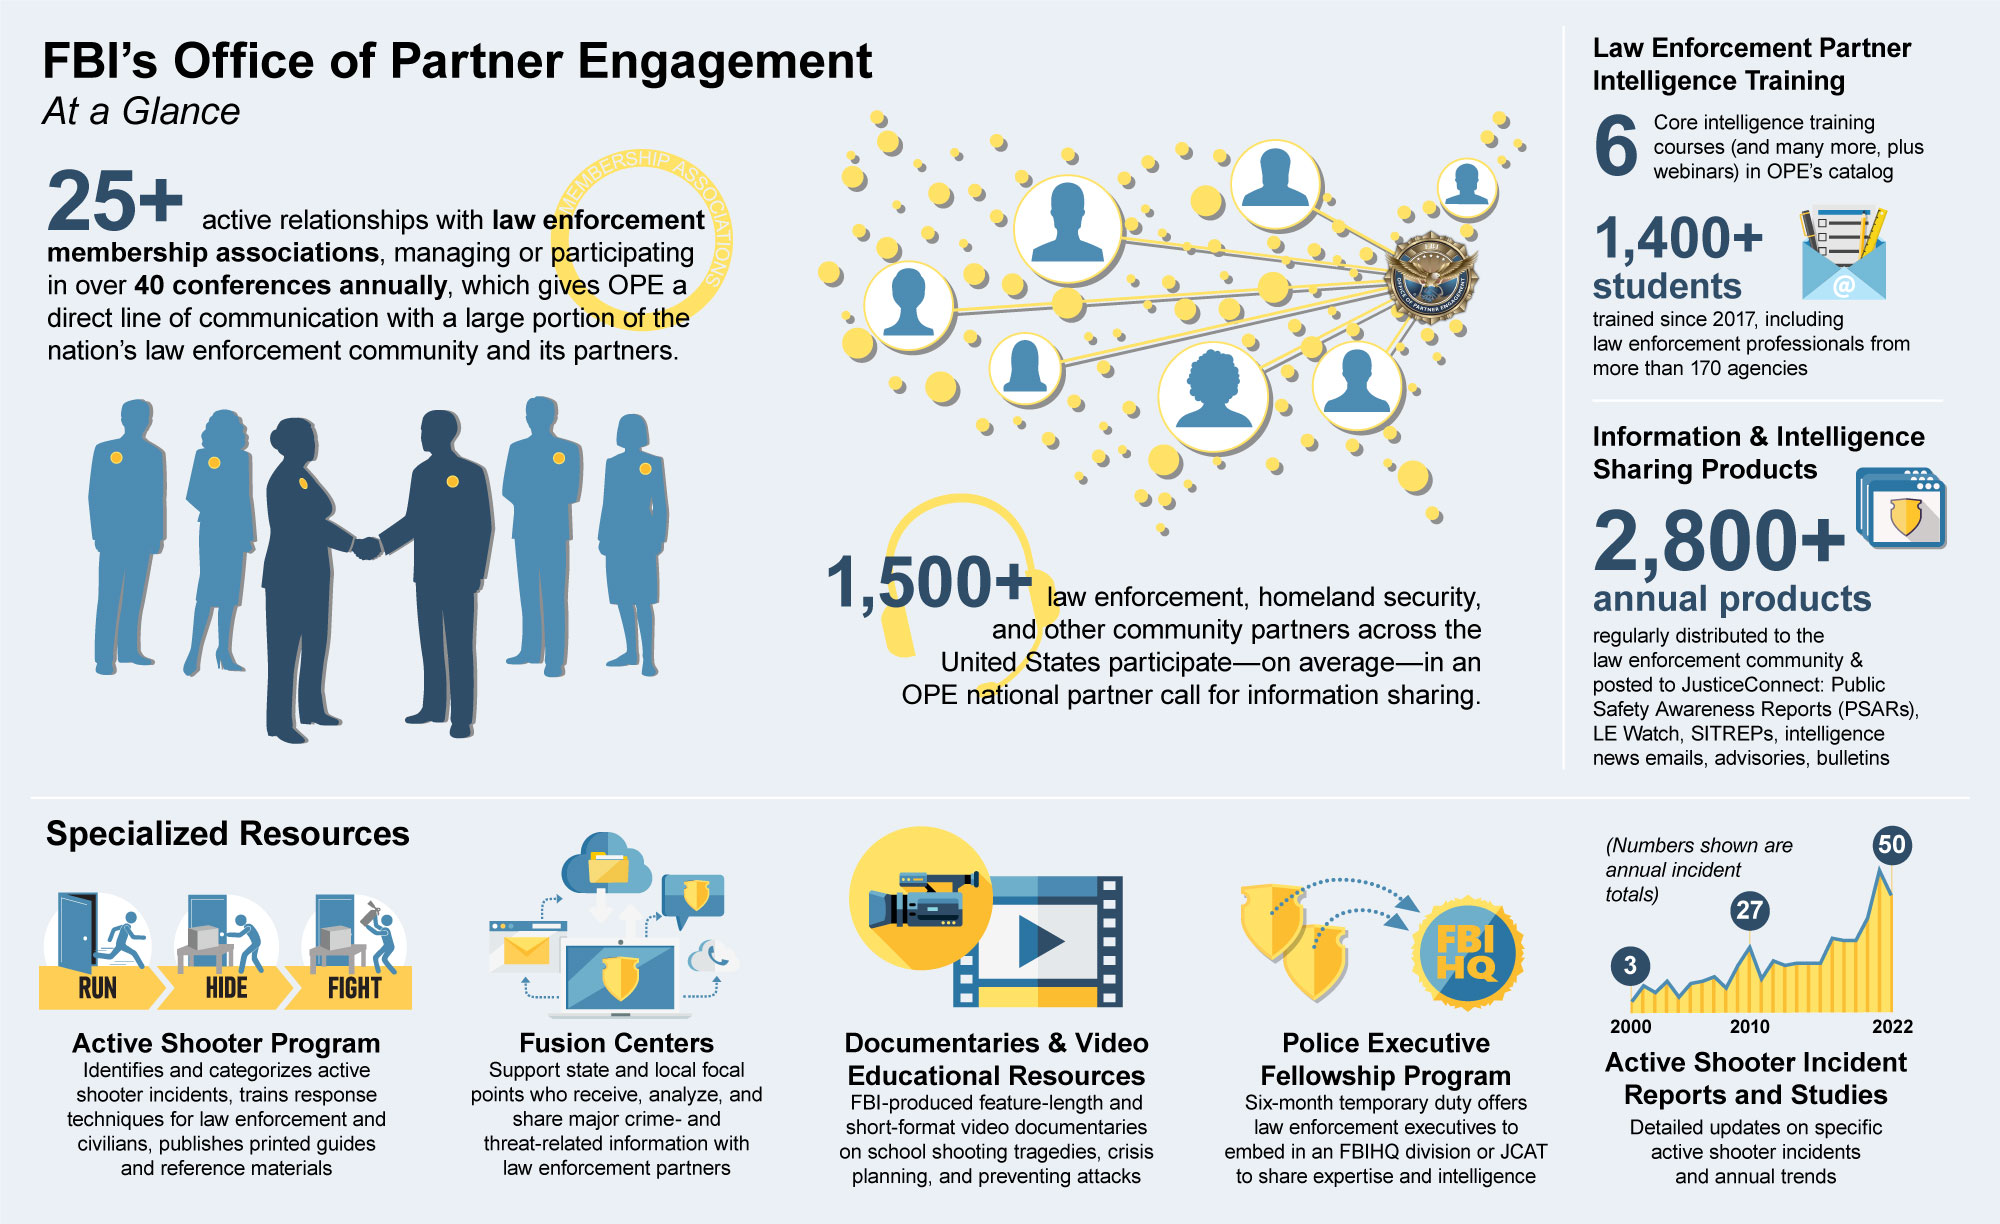 FBI’s Office of Partner Engagement
At a Glance

20+ active relationships with law enforcement membership associations, managing or participating in over 40 conferences annually, which gives OPE a direct line of communication with a large portion of the nation's law enforcement community and its partners.

1,500+ law enforcement, homeland security, and other community partners across the United States participate—on average—in an OPE national partner call for information sharing.

​​​​​​​Intelligence Training
6 Core Intelligence training courses (and many more, plus webinars) in OPE's catalog
1,400+ students trained since 2017, including FBI and law enforcement professionals from more than 170 agencies

Information & Intelligence Sharing Products
1,100+ annual products regularly distributed to the law enforcement community: Public Safety Awareness Reports (PSARs), LE Watch, SITREPs, intelligence news emails, advisories, bulletins

Specialized Resources

Active Shooter Program 
Identifies and categorizes active shooter incidents, trains response techniques for law enforcement and civilians, produces educational and documentary videos

Fusion Centers
Support state and local focal points who receive, analyze, and share major crime- and threat-related information with law enforcement partners

Police Executive Fellowship Program
Six-month temporary duty offers law enforcement executives to embed in an FBIHQ division or JCAT and share expertise and intelligence

eGuardian System
Allows law enforcement agencies to combine new suspicious activity reports with existing ones to form a single information repository

Active Shooter Incident Reports and Studies
Detailed updates on specific active shooter incidents and annual trends

2000: 3  
2010: 27  
2021: 61
(Numbers are annual incident totals)